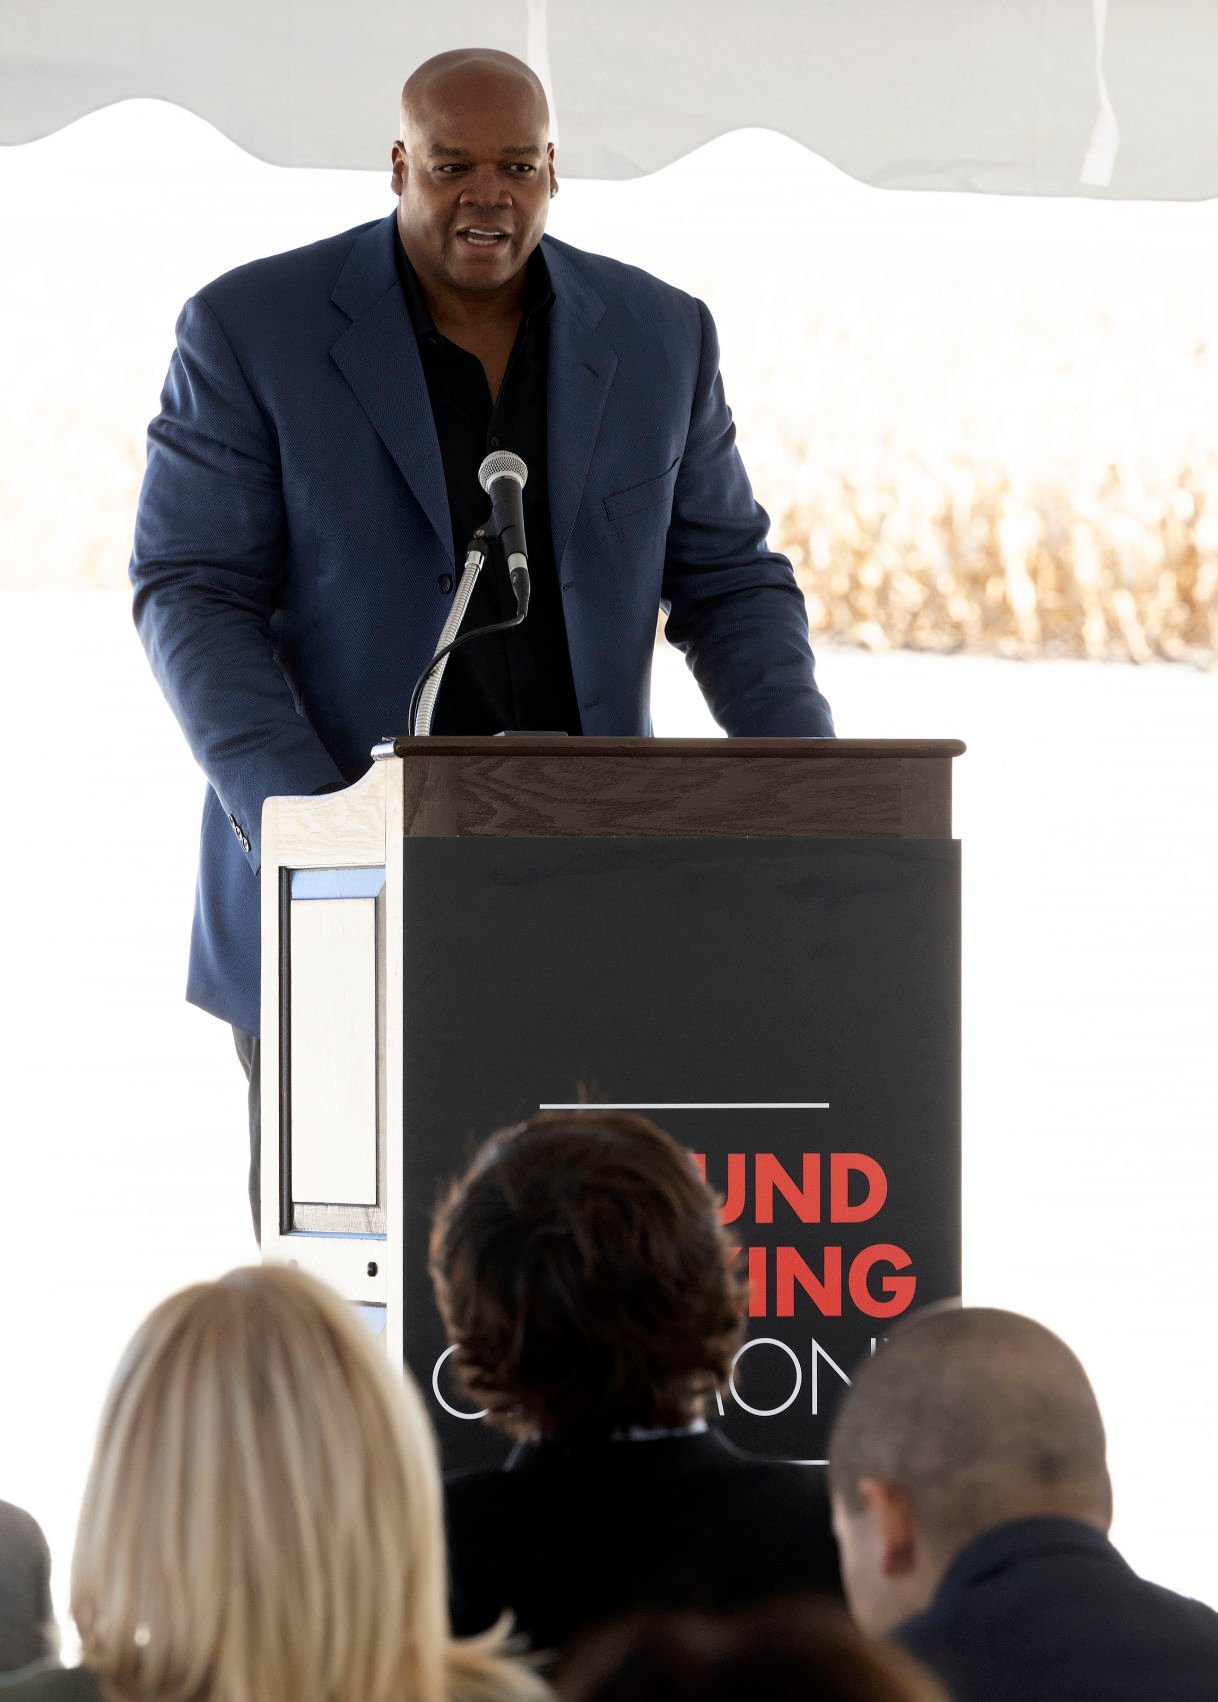 Frank Thomas speaks during the Project Heaven groundbreaking ceremony at the Field of Dreams in Dyersville, Iowa, on Wednesday, Sept. 28, 2022.    PHOTO CREDIT: Stephen Gassman